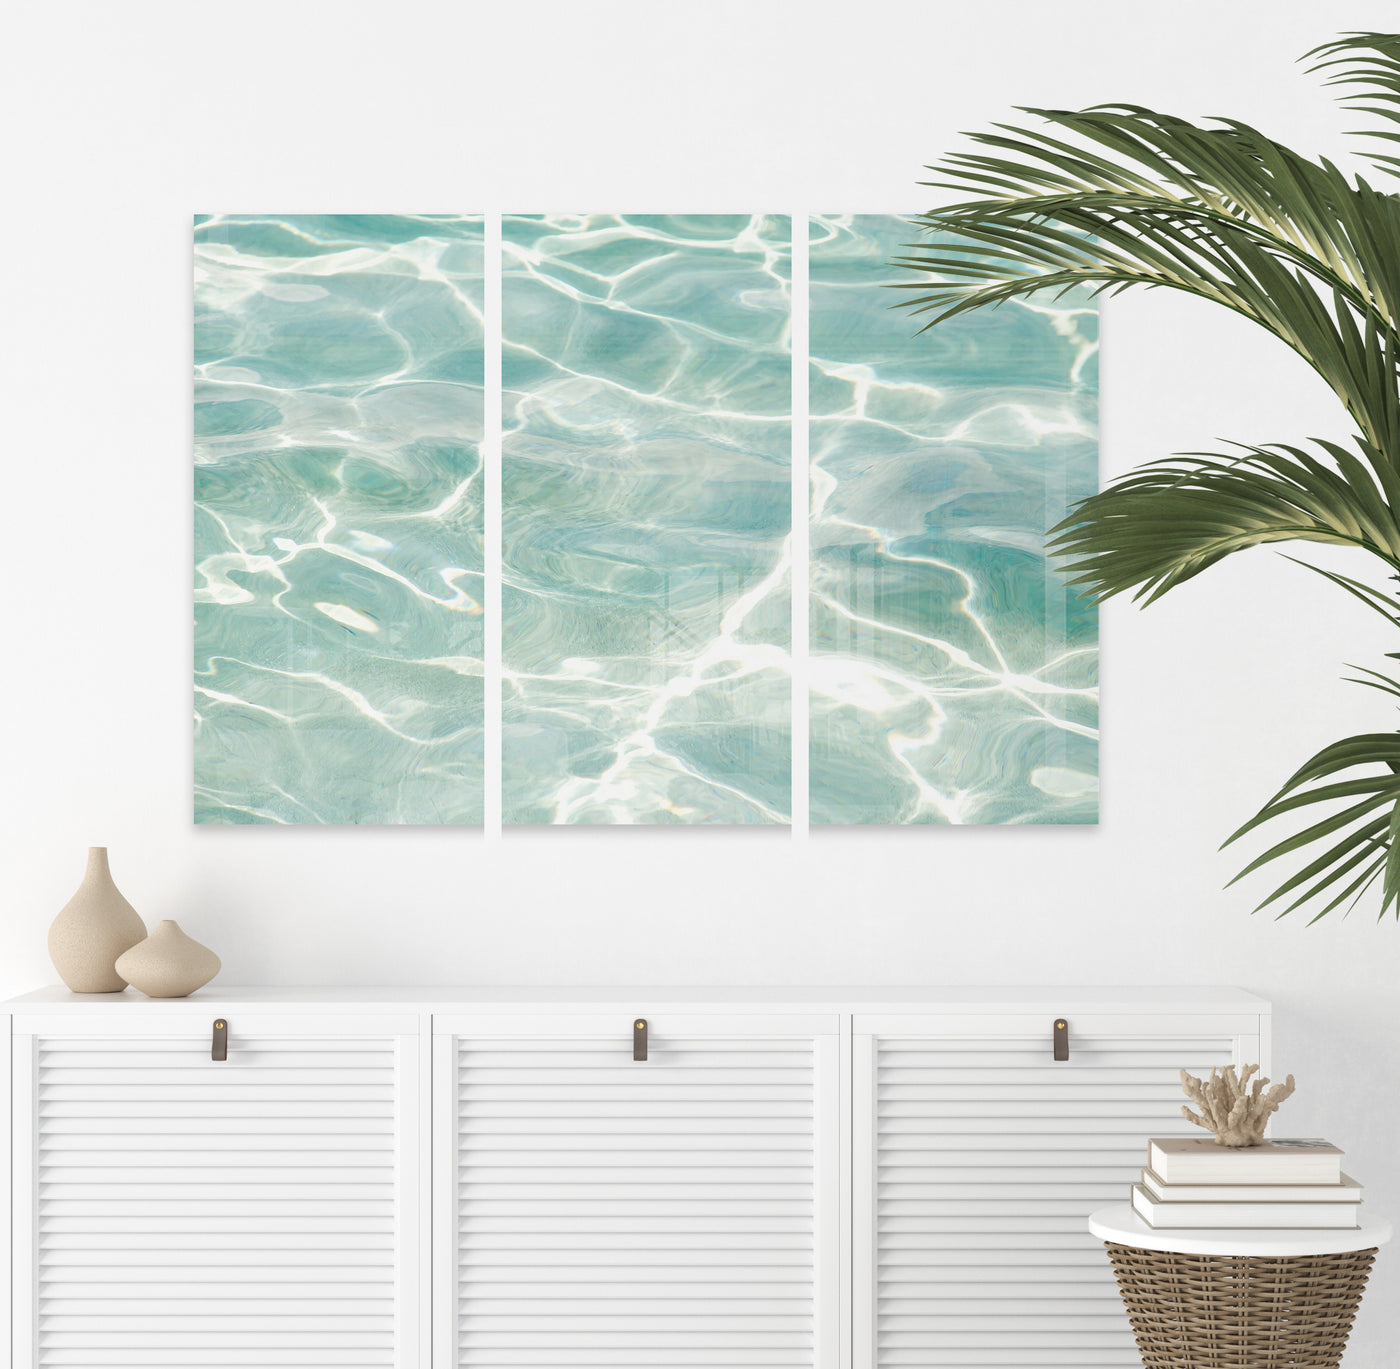 Caribbean Sea No 3 - Large triptych wall art by Cattie Coyle Photography above dresser